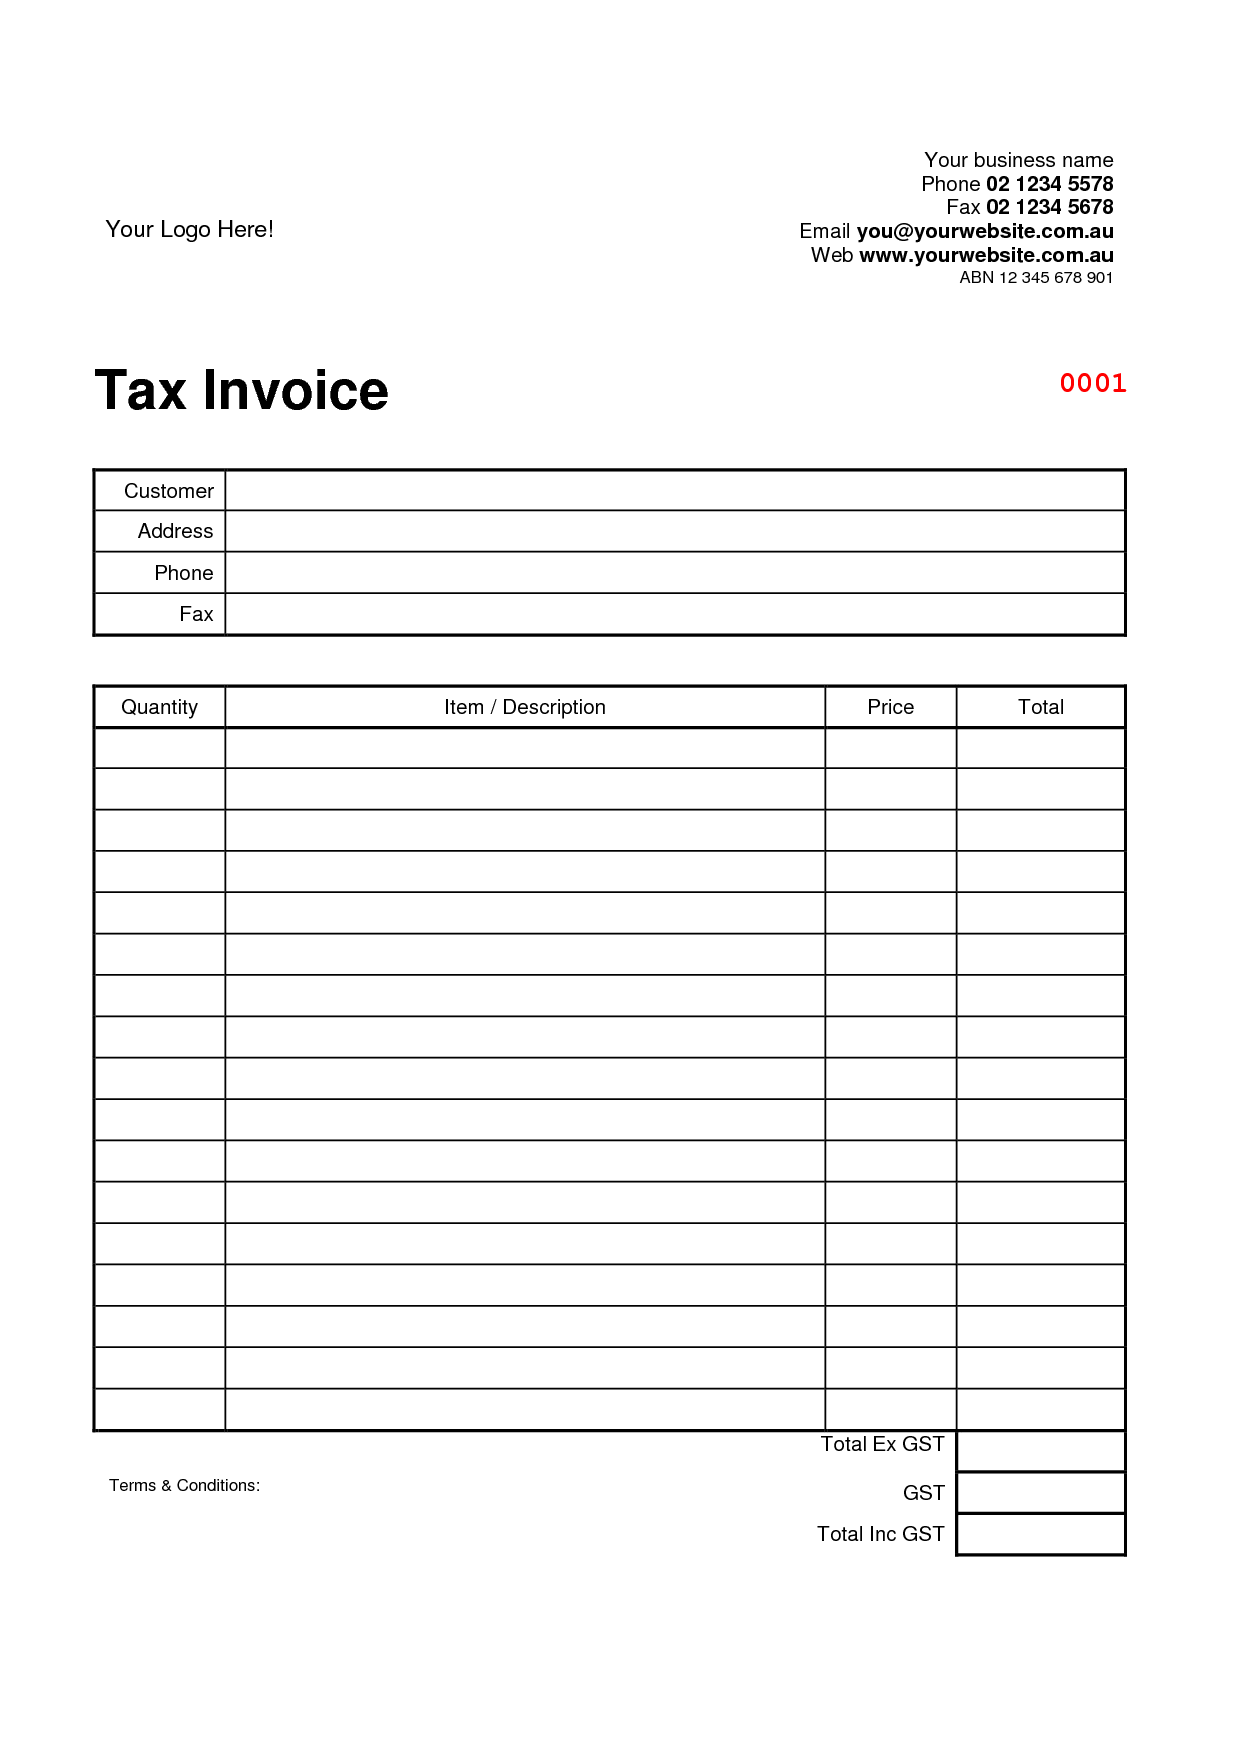 Excel invoice template free download for mac 2017